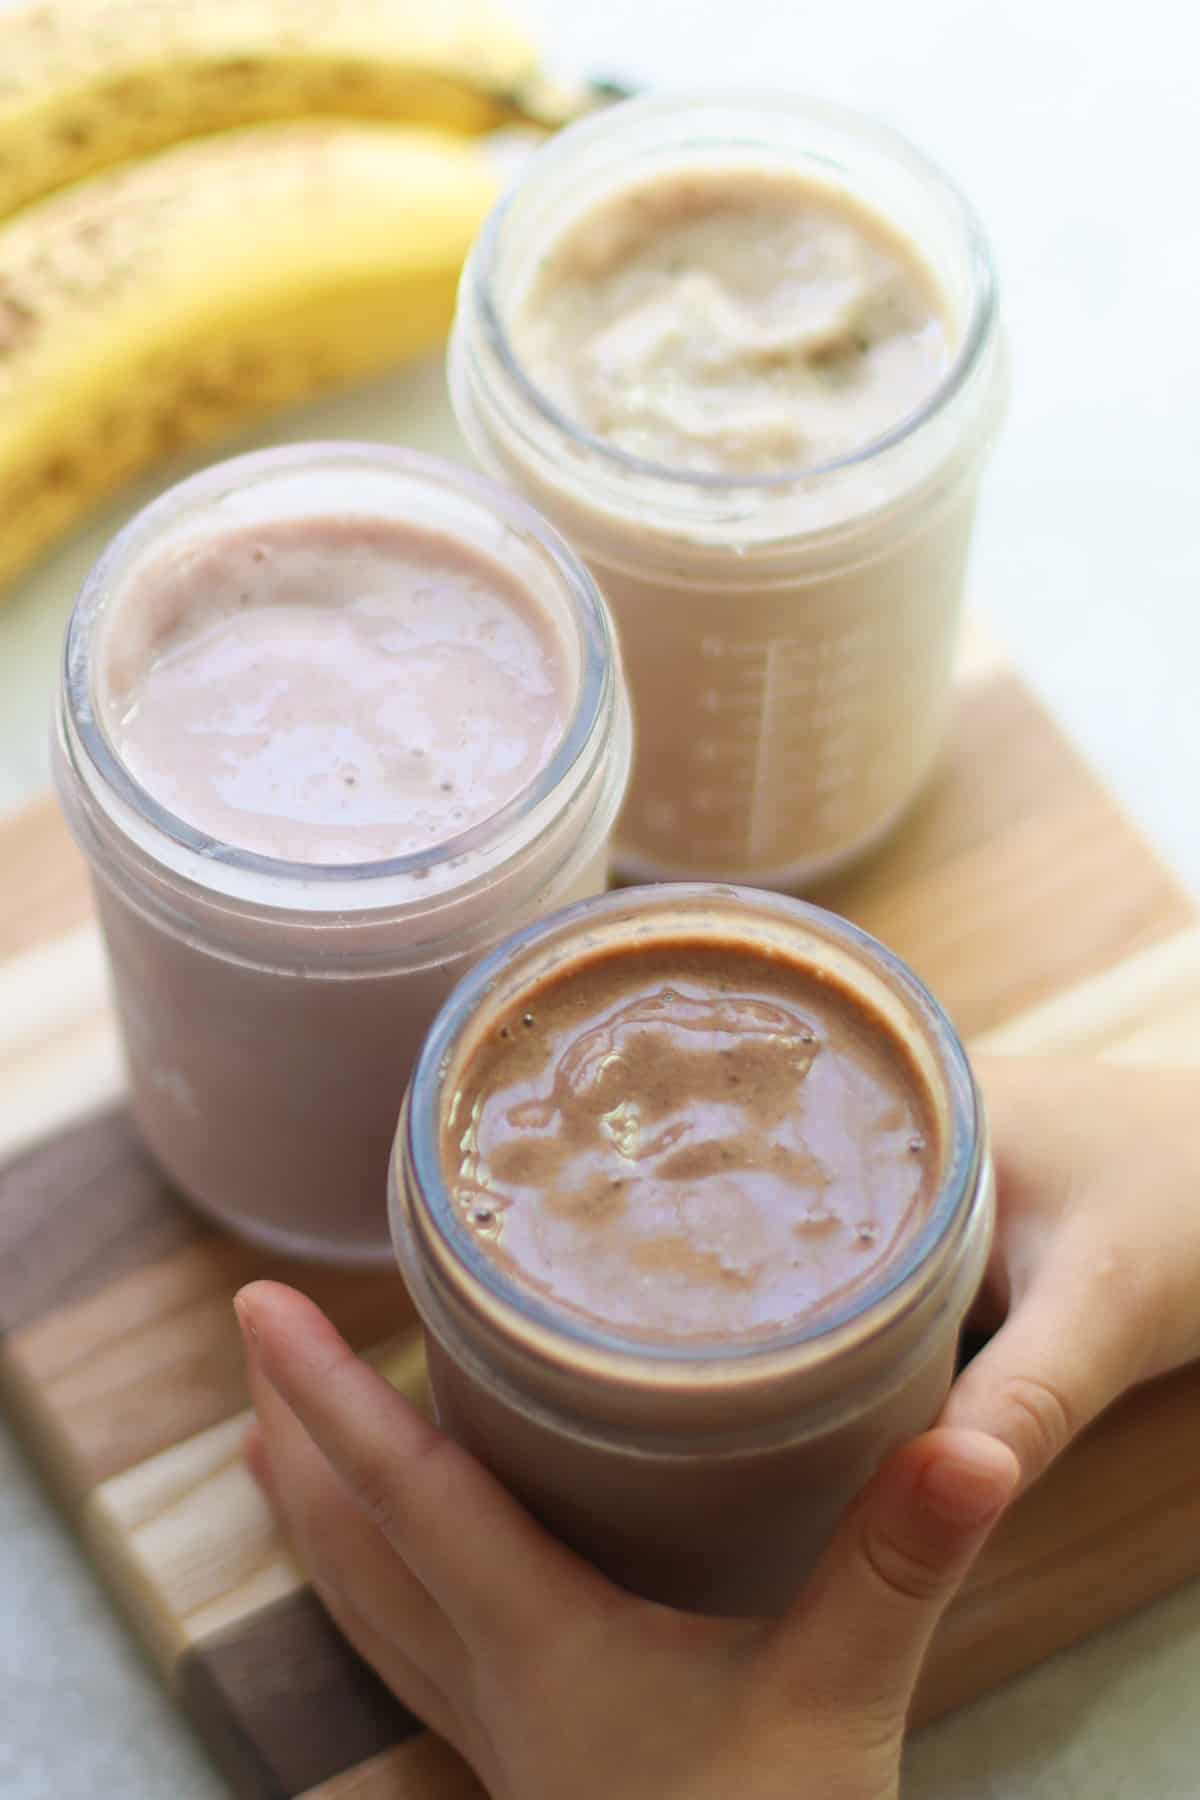 A close up shot of the milkshakes in  glass jars.